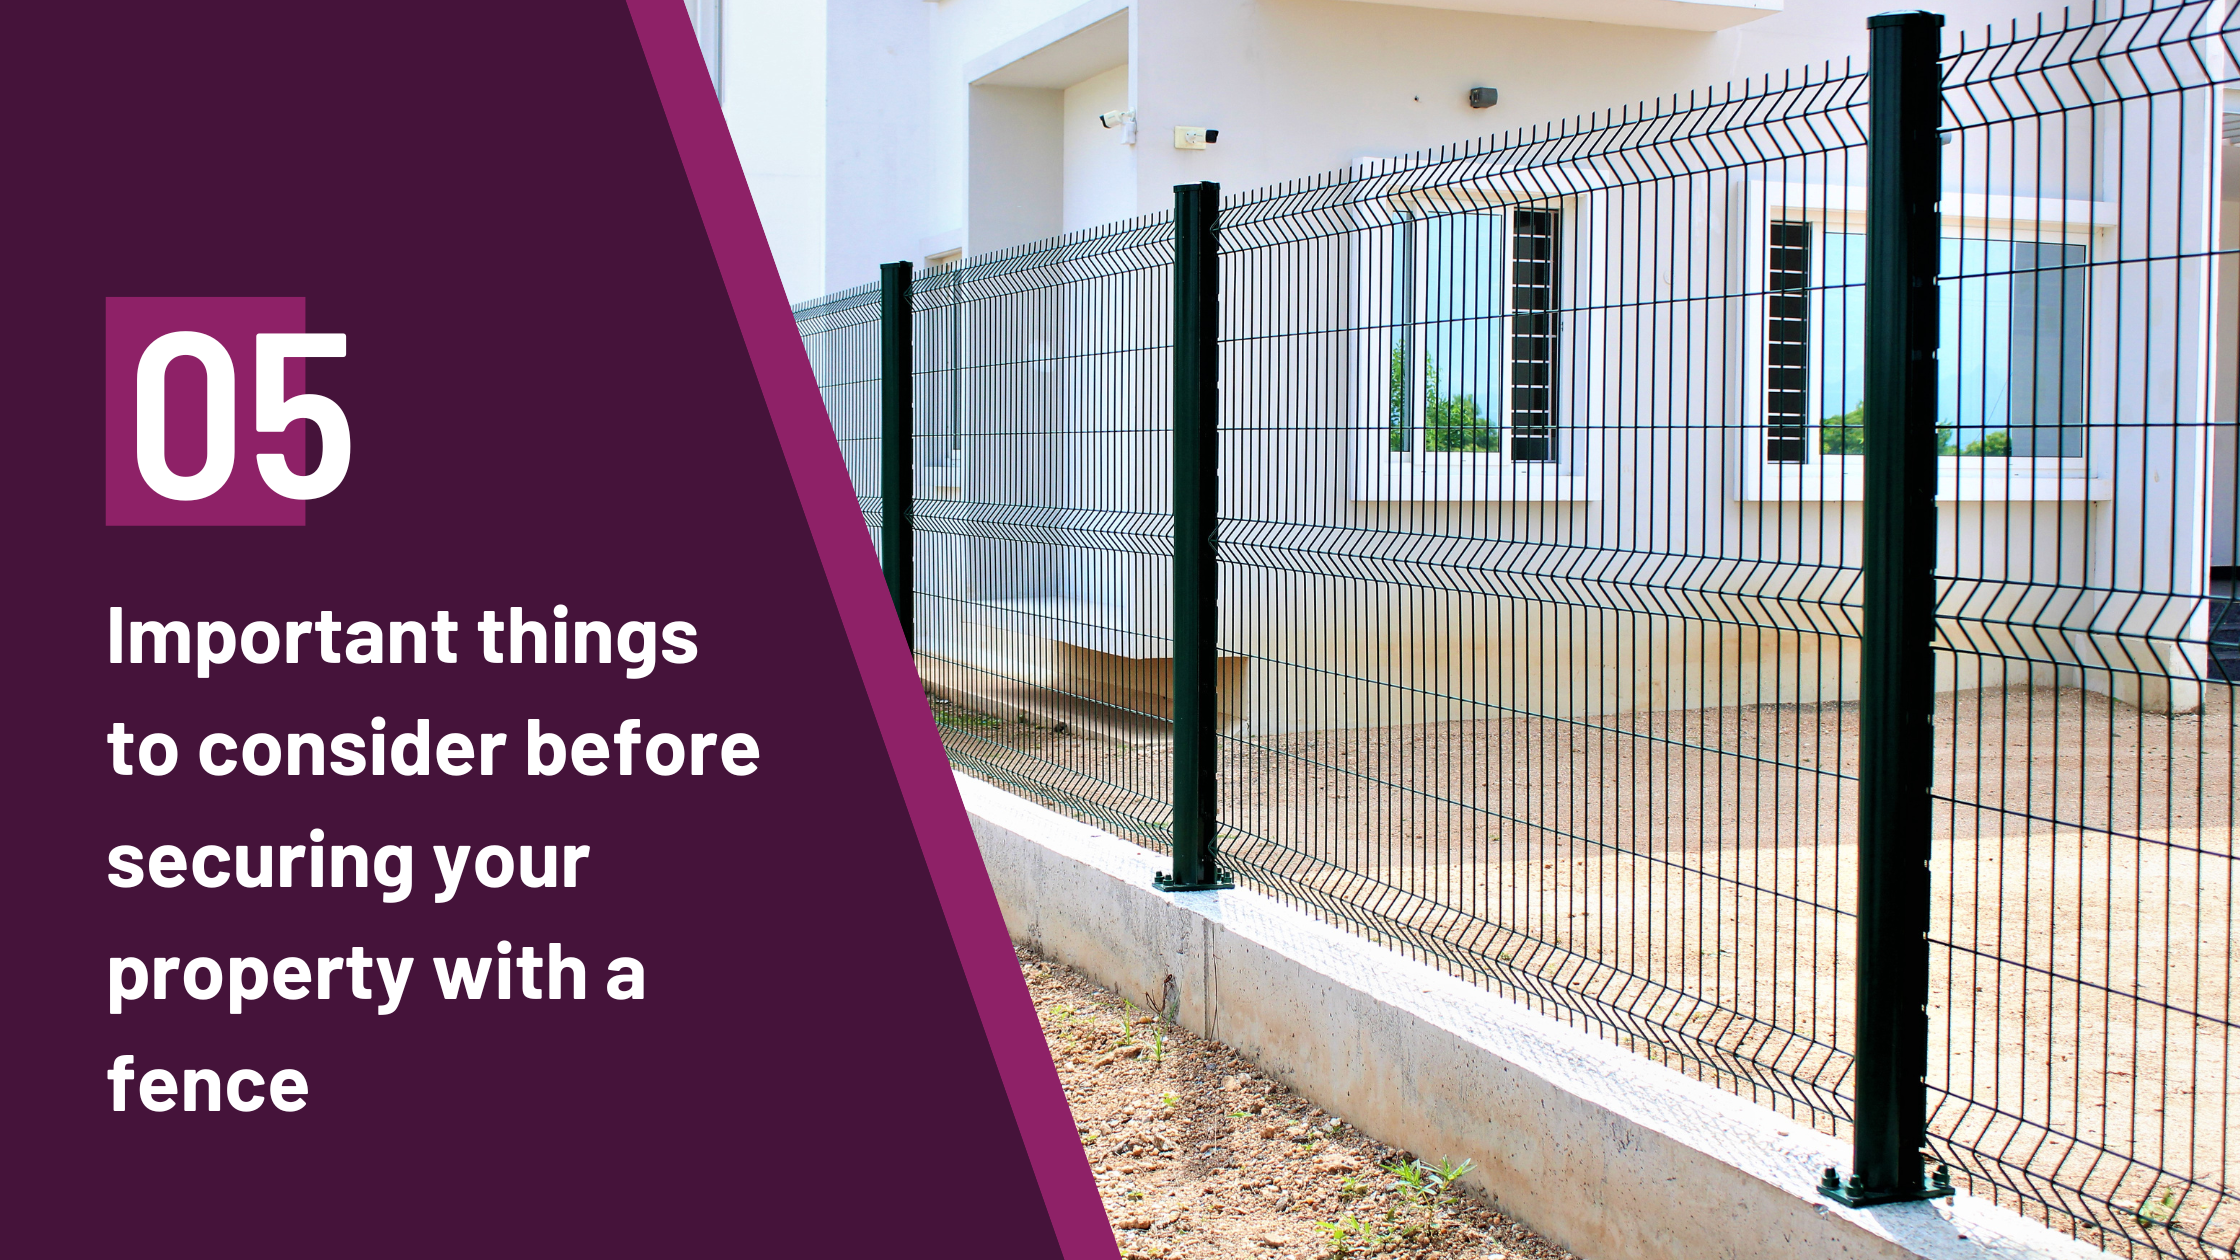 Planning to Fence Your Perimeter? Don't Miss Out on These 5 Crucial Things